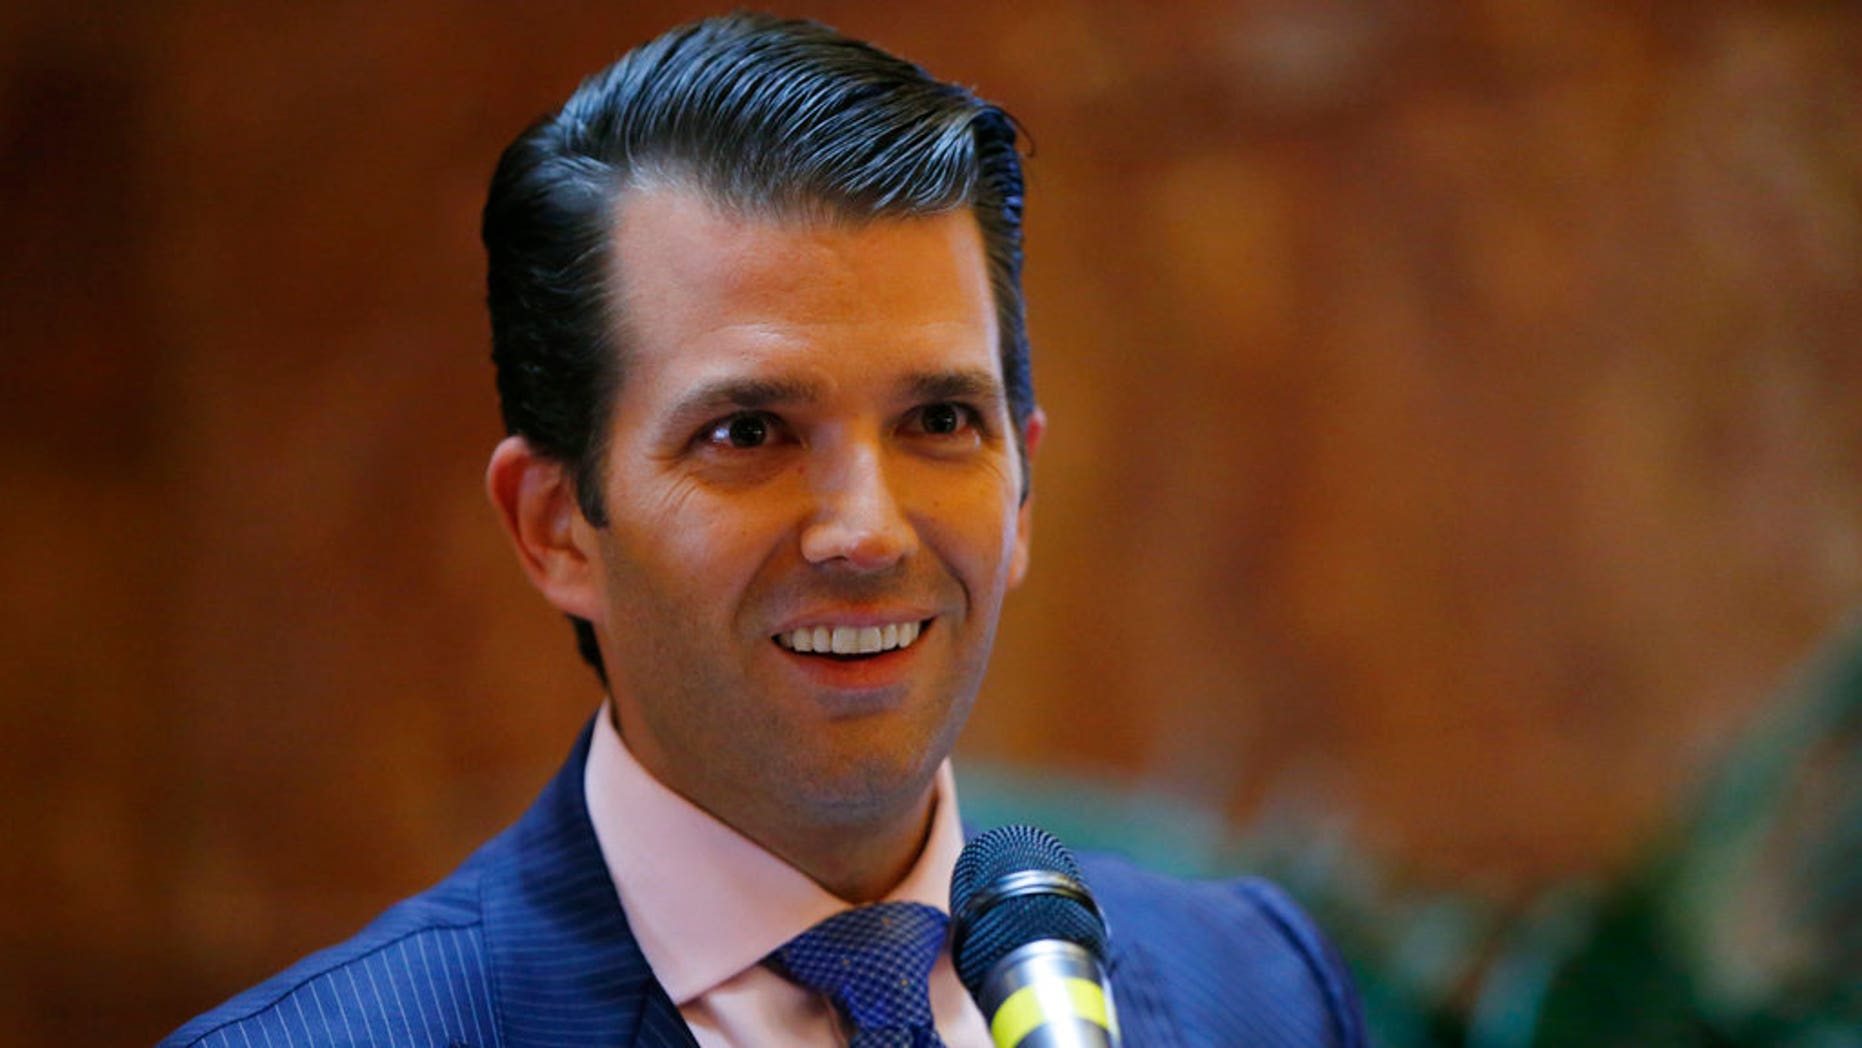 Donald Trump Jr. calls out Schiff after reports say that blocked phone calls weren’t to father